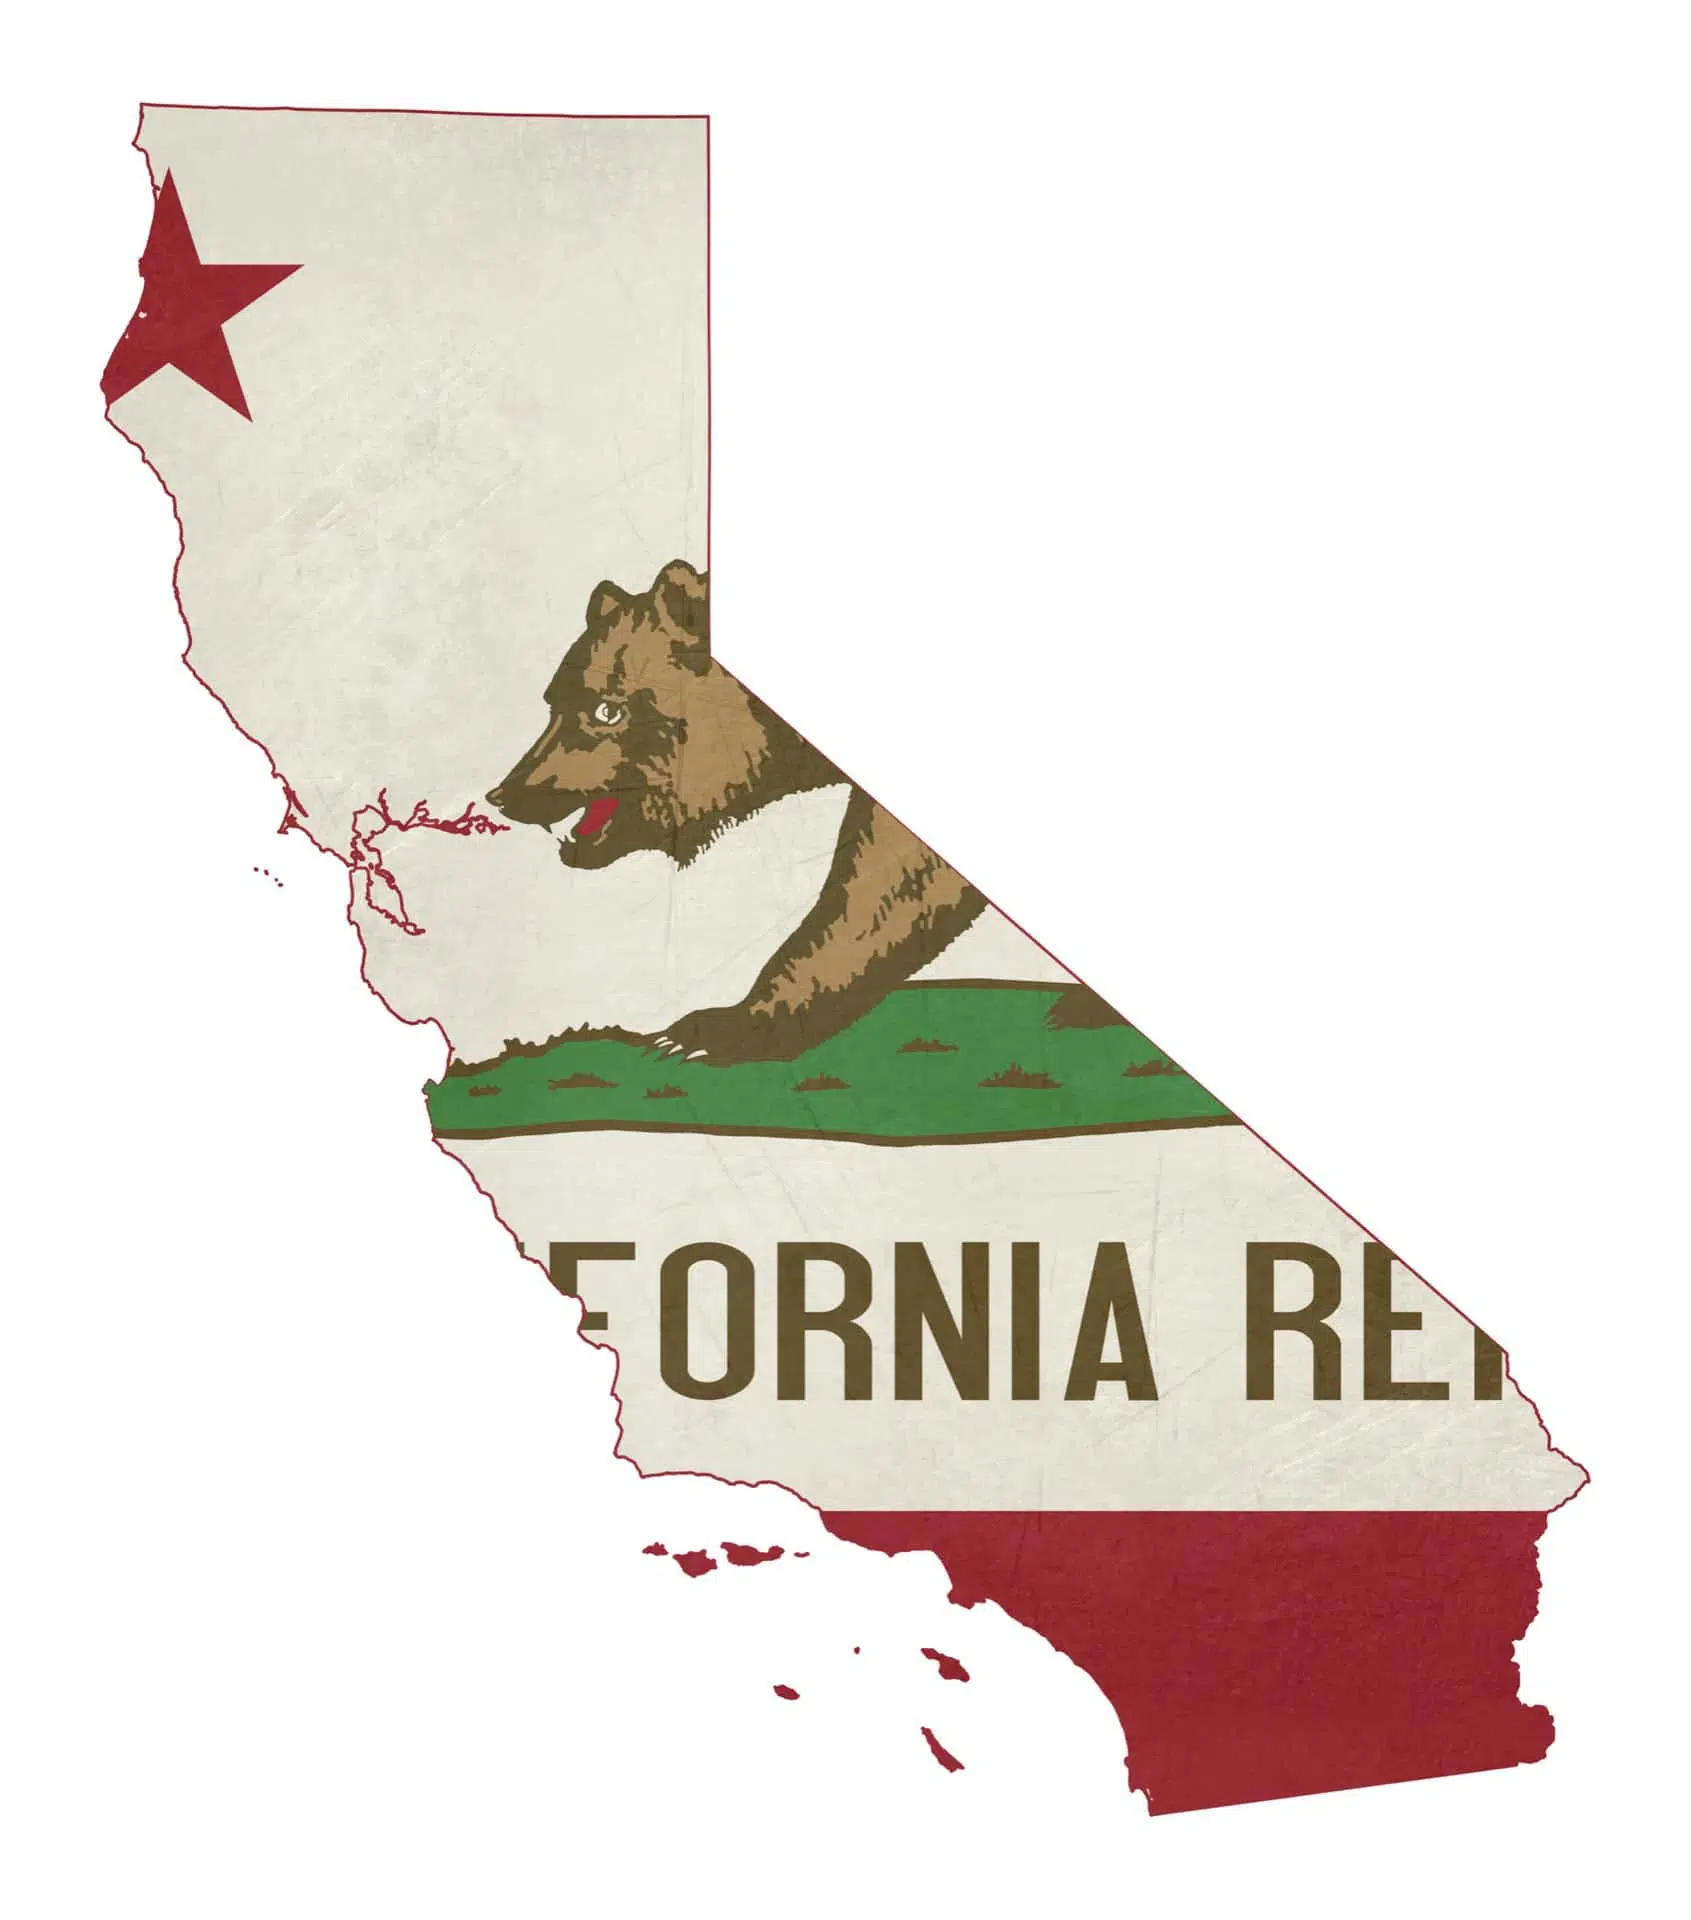 Image of the outline of the state of California